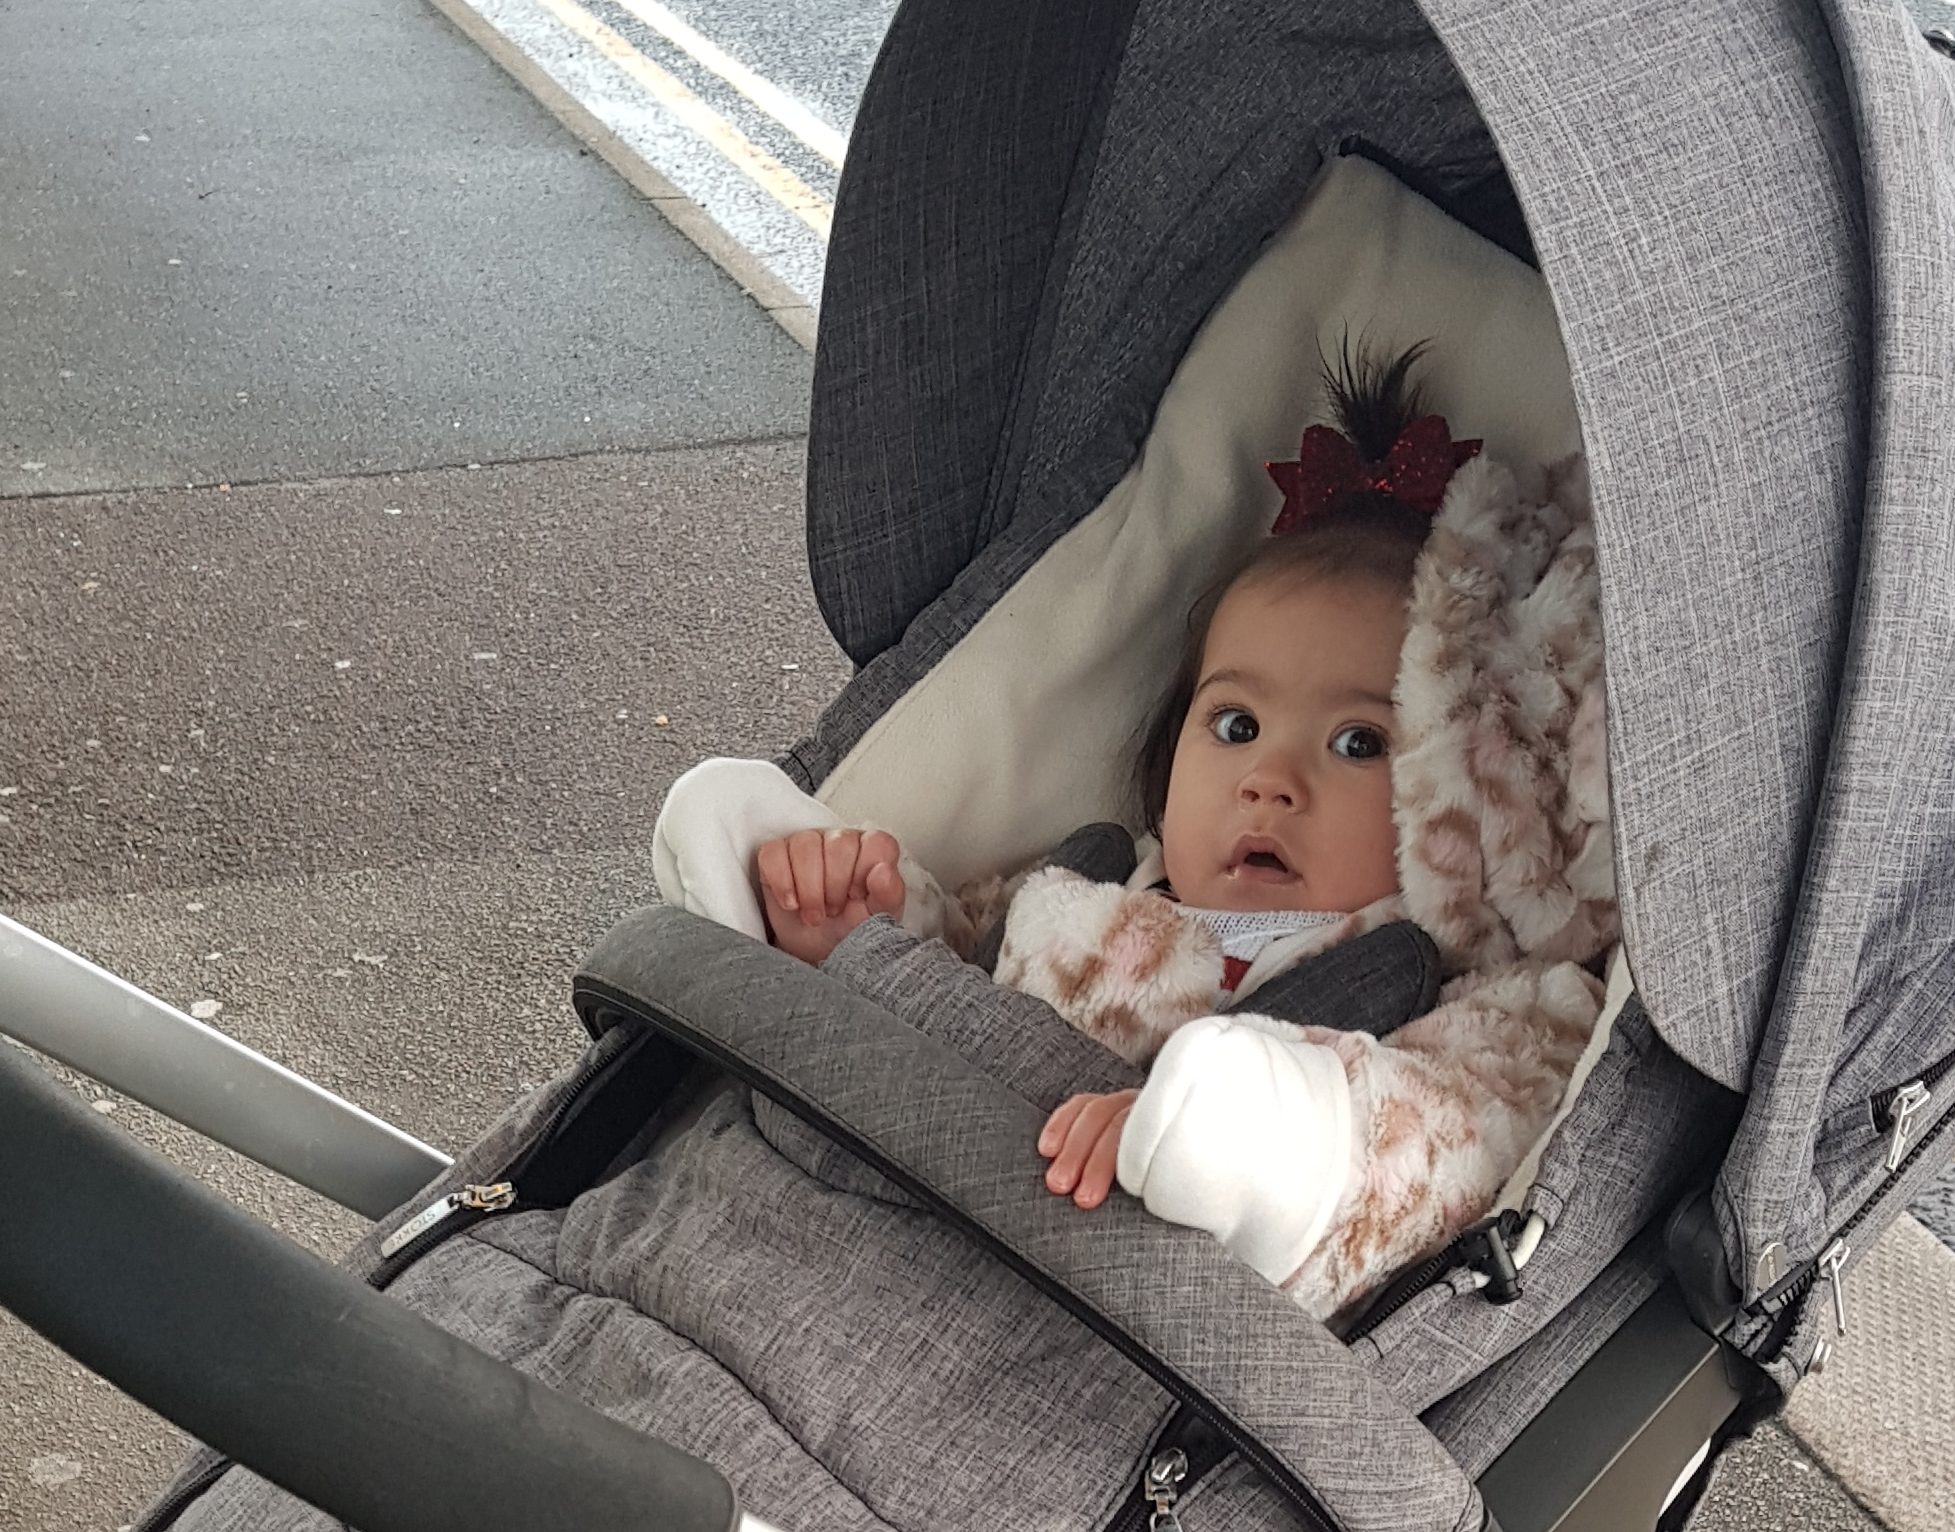 Sophie Bilsland was waiting at the bus stop with her daughter Mila.